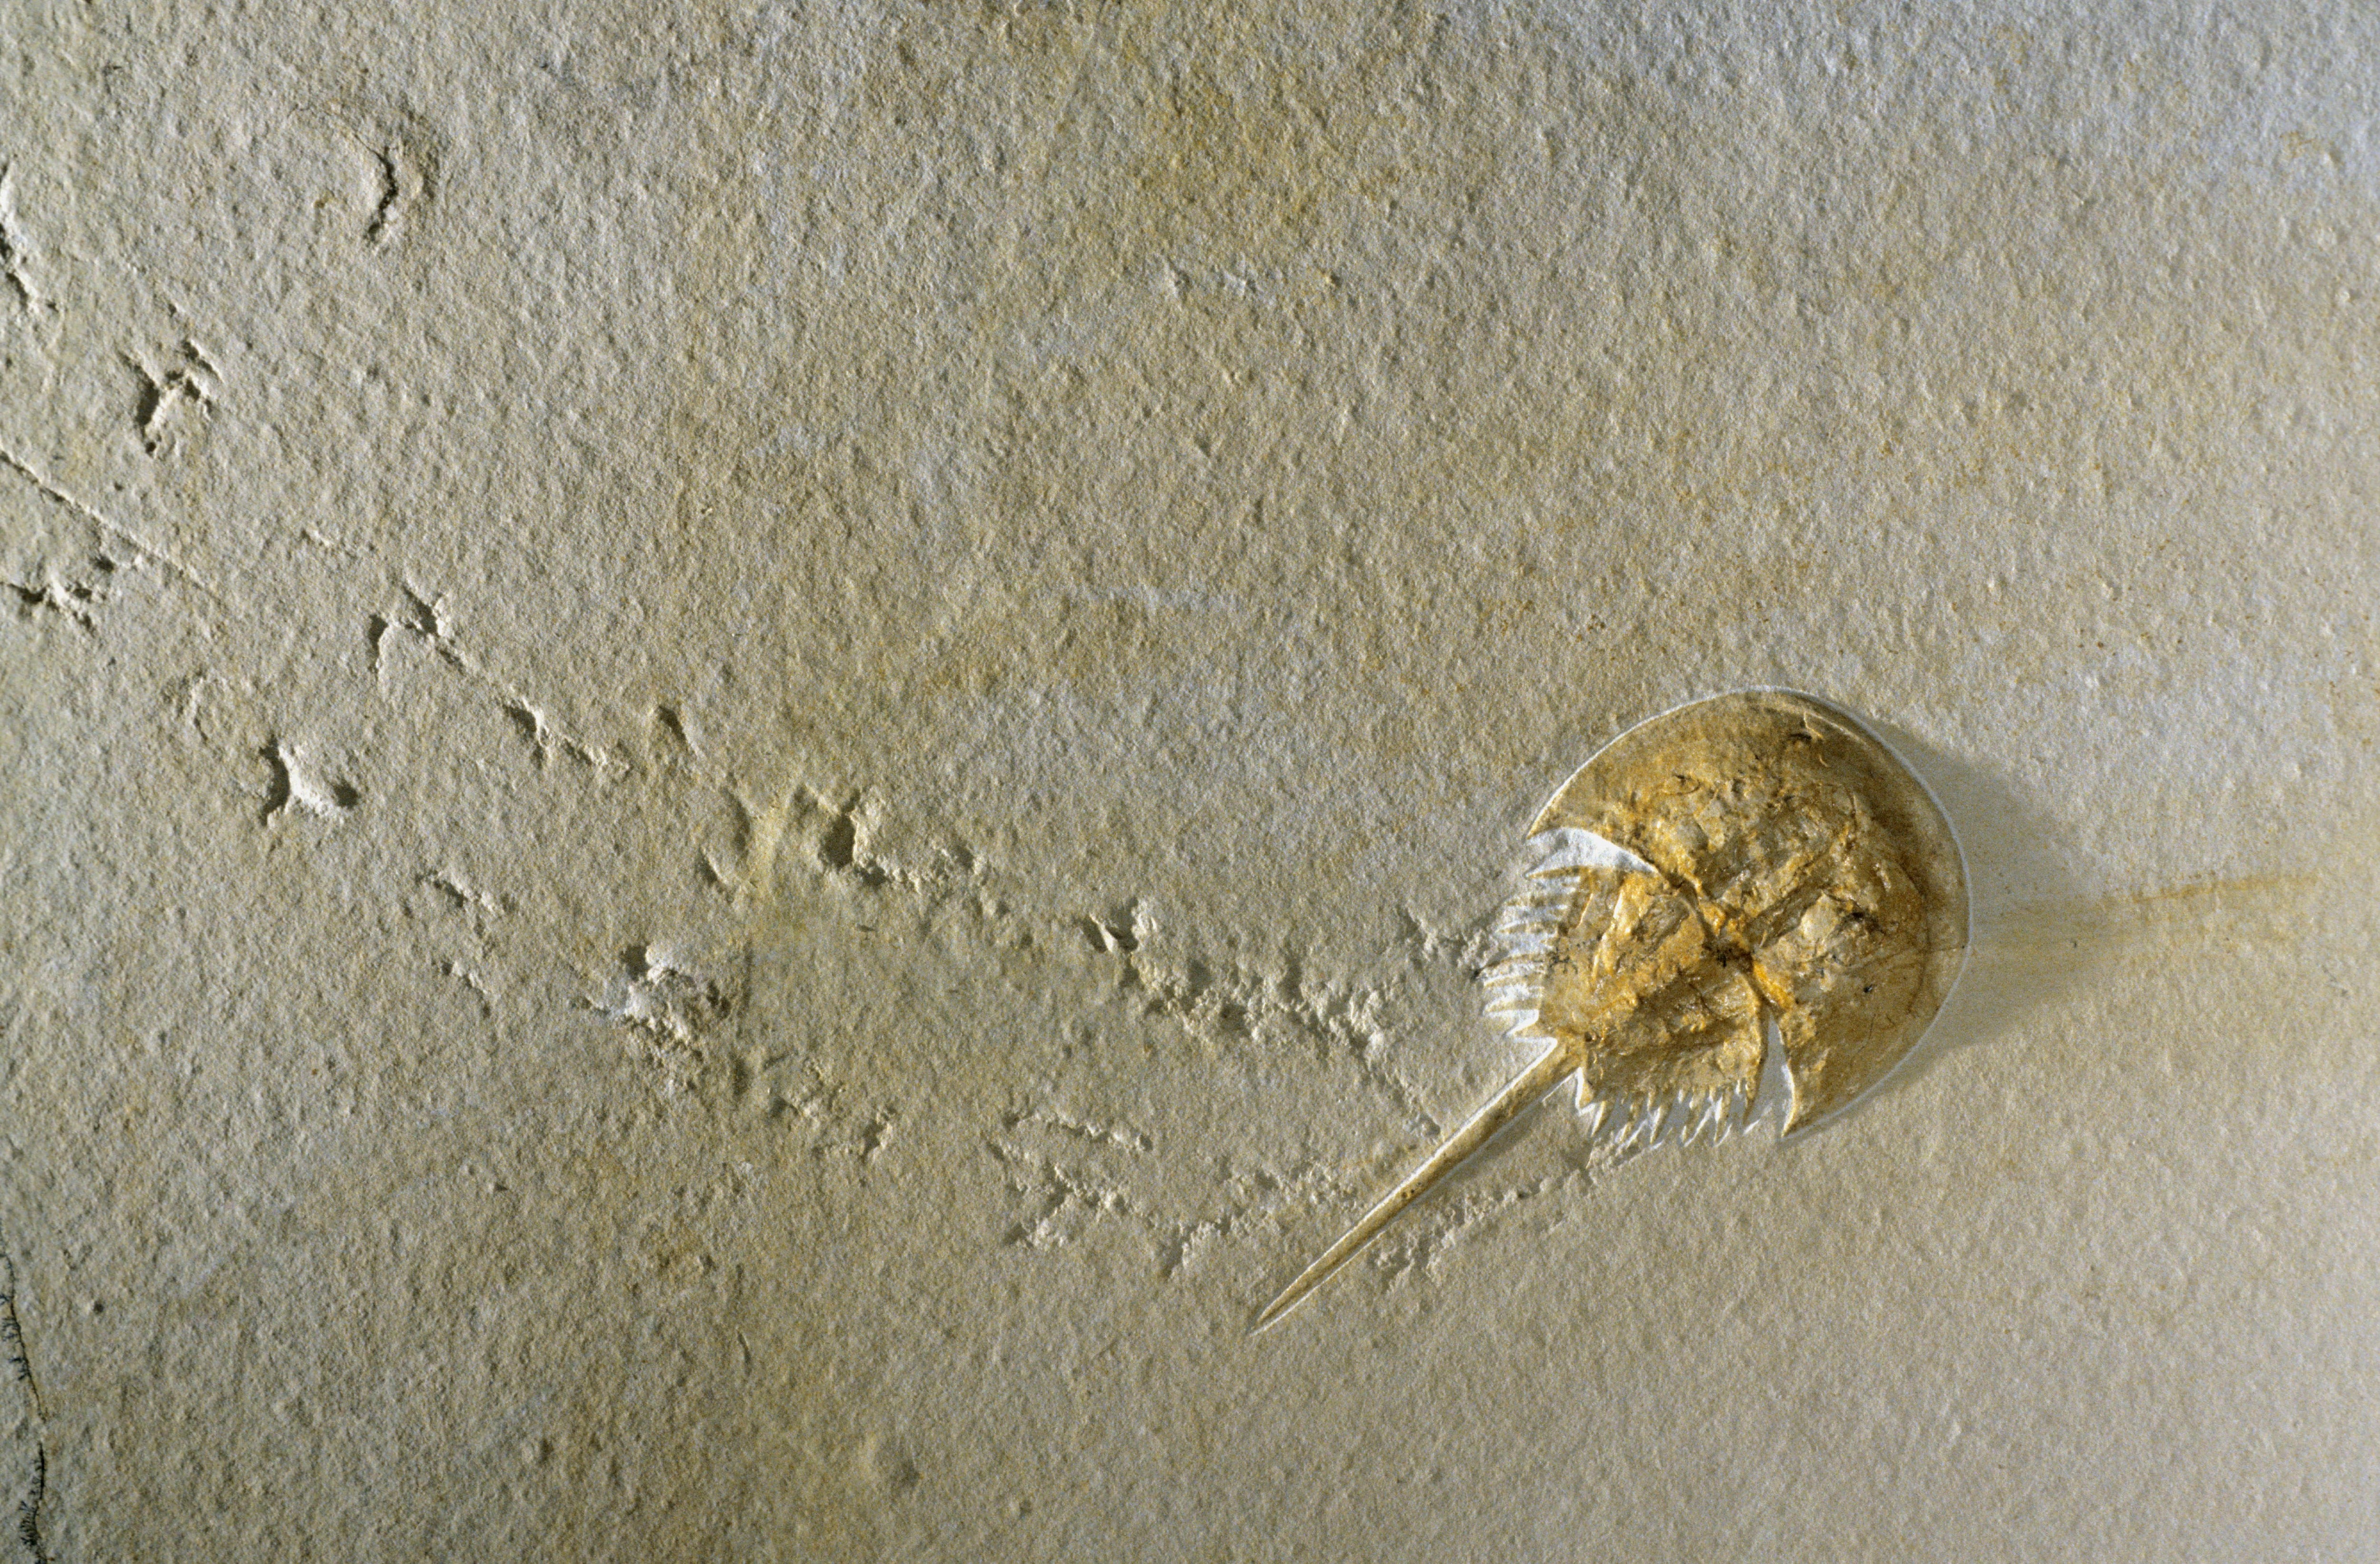 Ancient horseshoe crab's brain remained intact in a fossil for eons | SYFY  WIRE